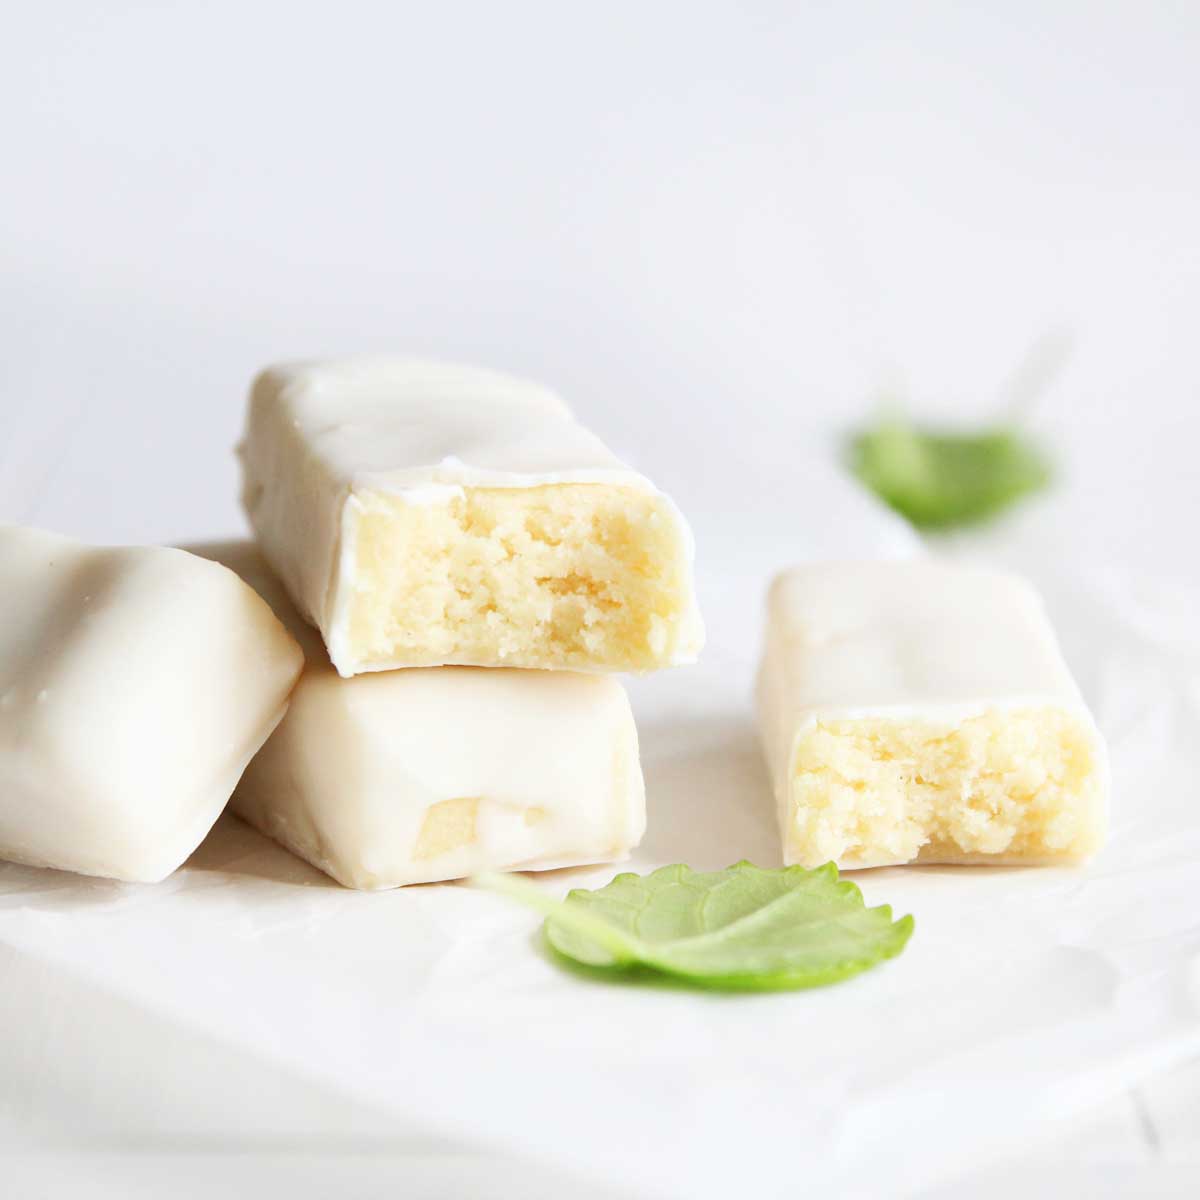 Healthy Homemade Lemon Protein Bars made with Collagen Peptides - Pistachio Nice Cream